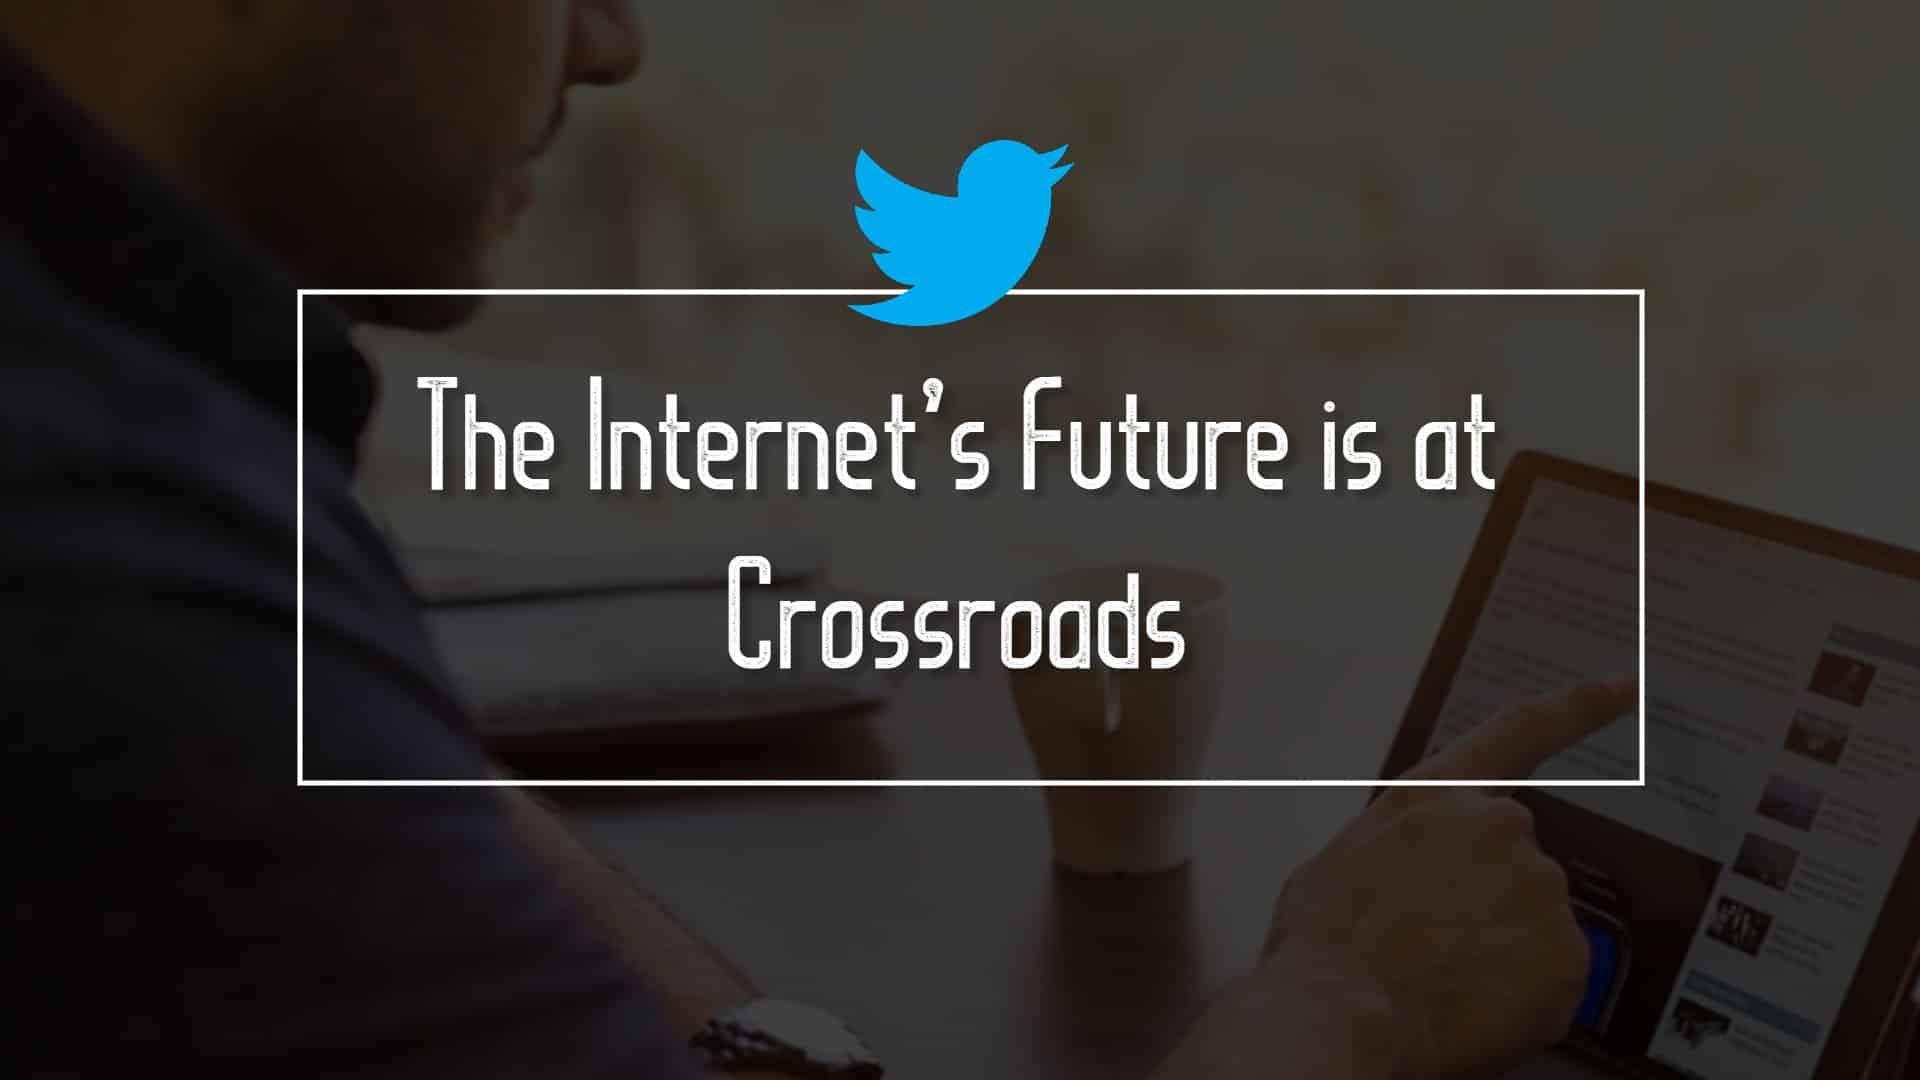 The Internet’s Future is at Crossroads